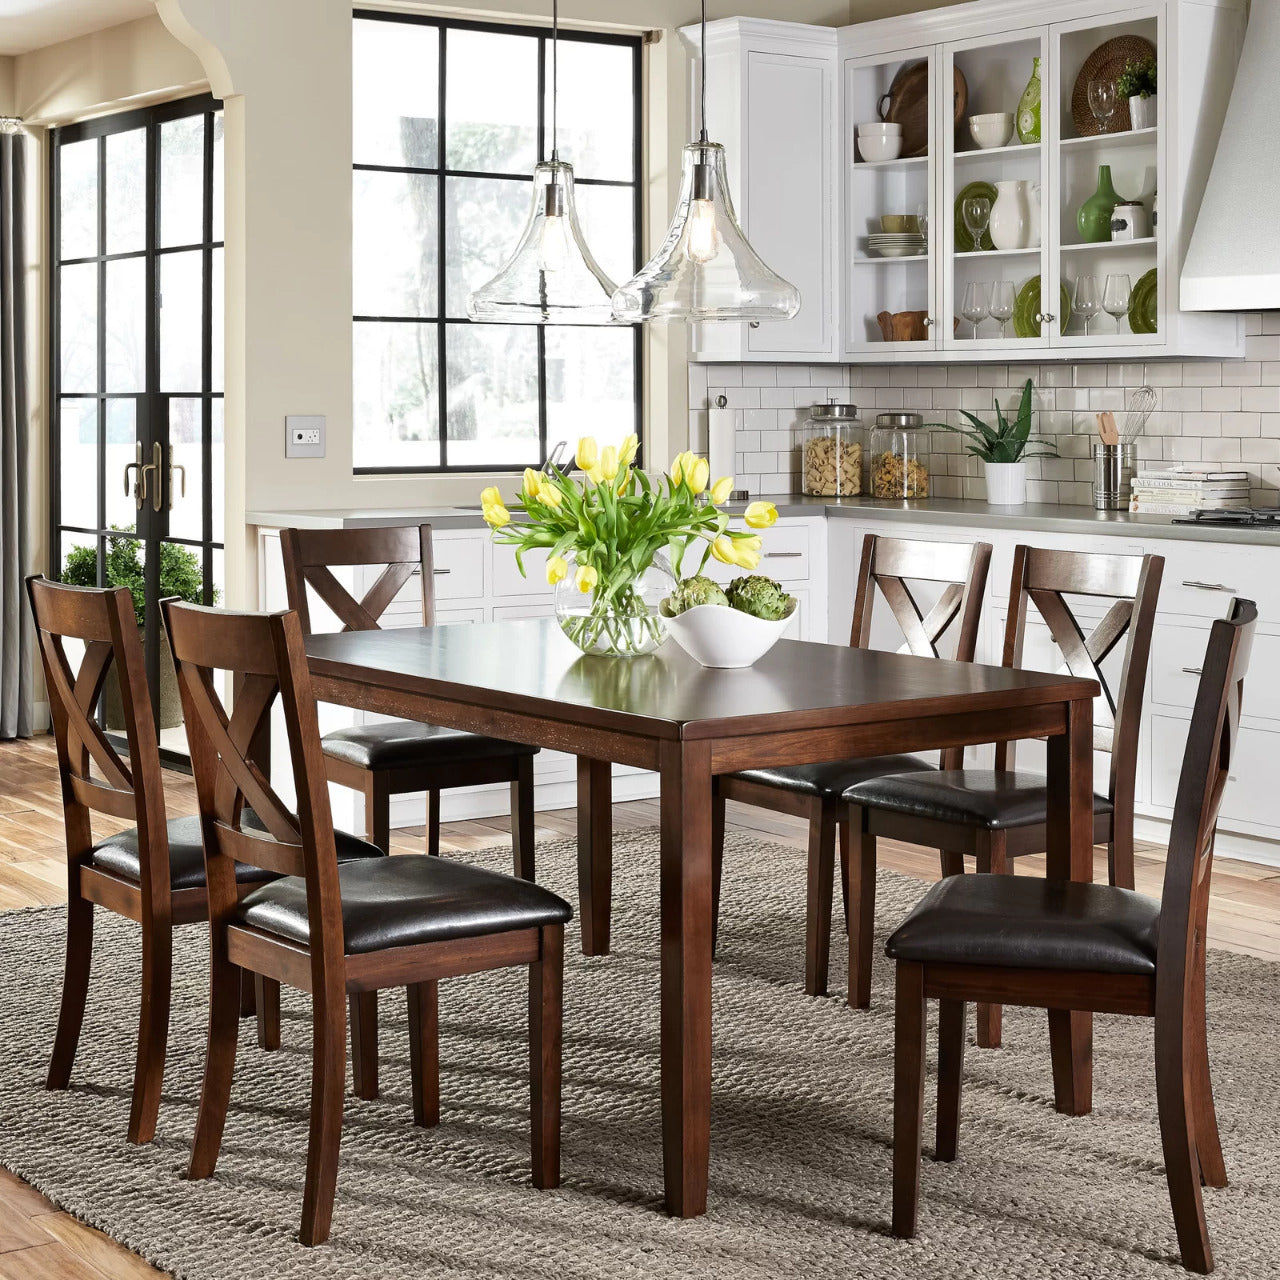 Dining Set: Wooden Dining Table with 6 Chairs Dining Set